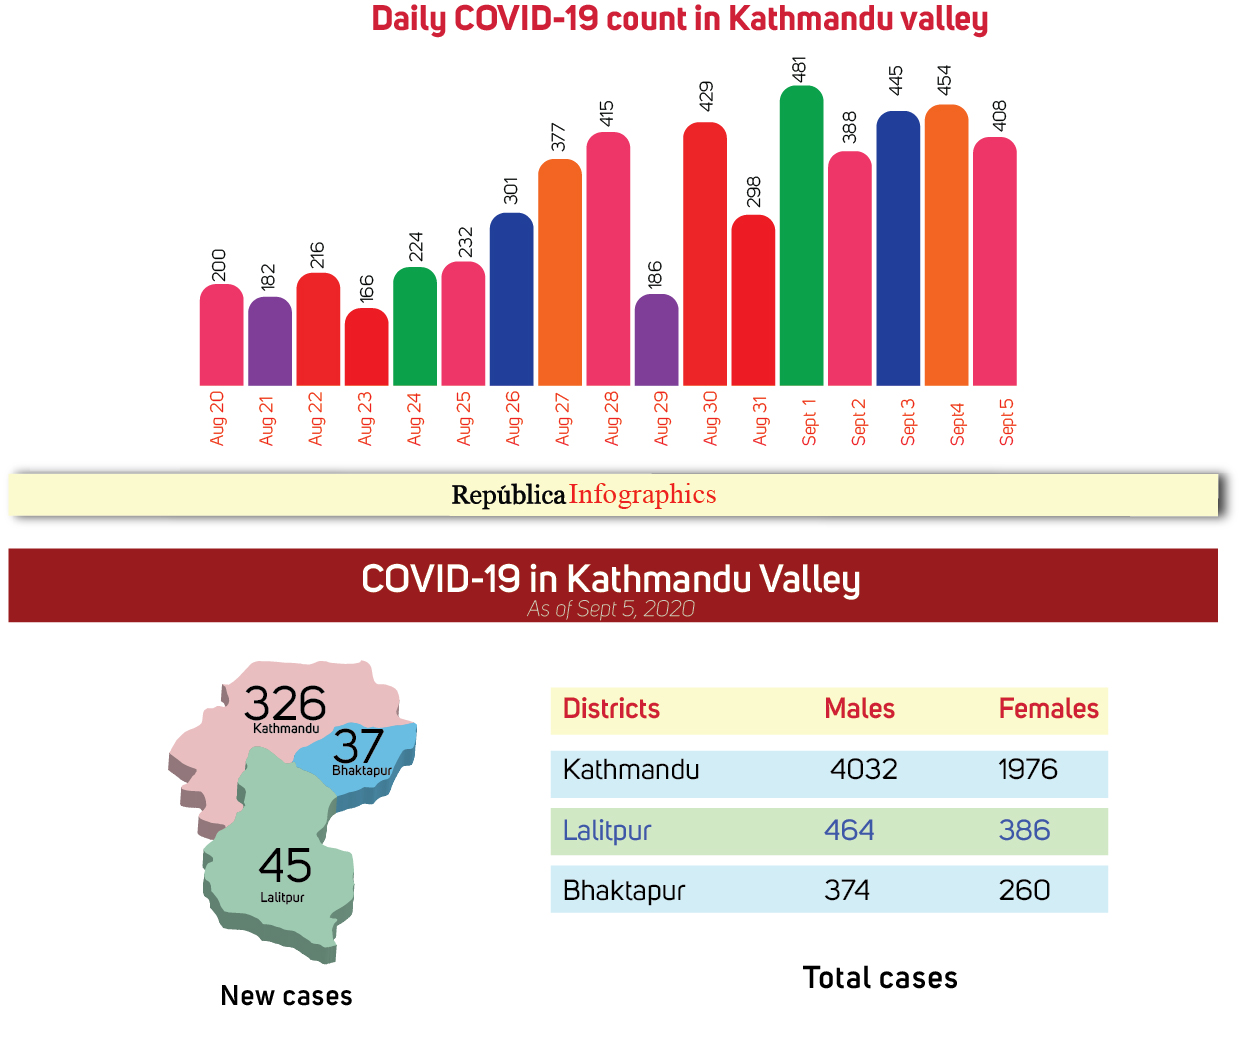 5,402 COVID-19 cases in Kathmandu Valley since prohibitory orders enforced